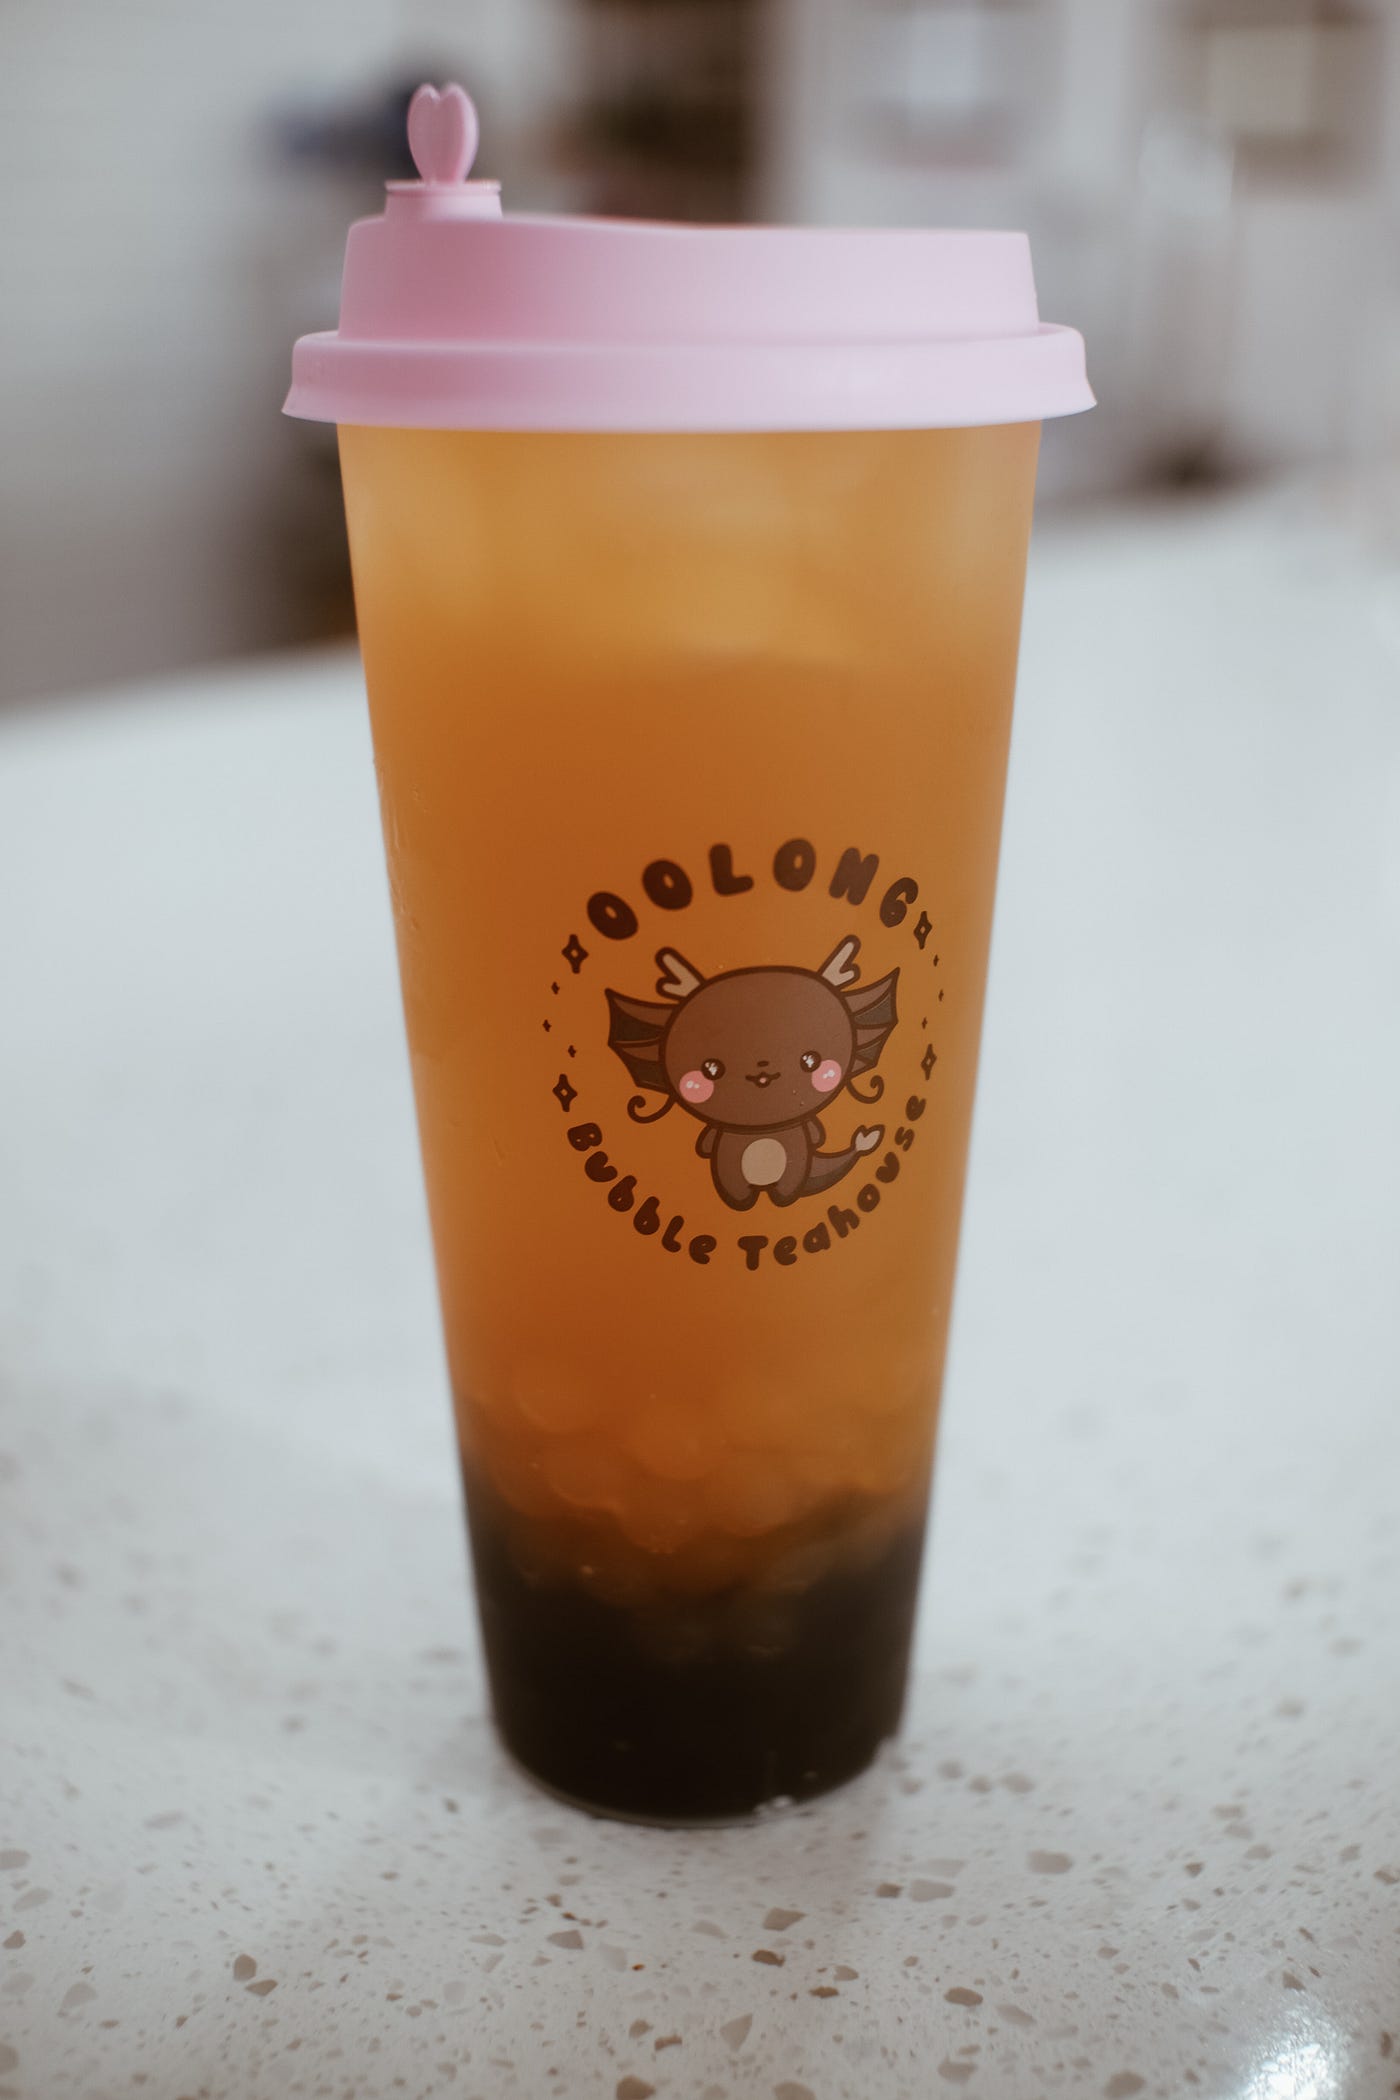 The rise of bubble tea, one of Taiwan's most beloved beverages